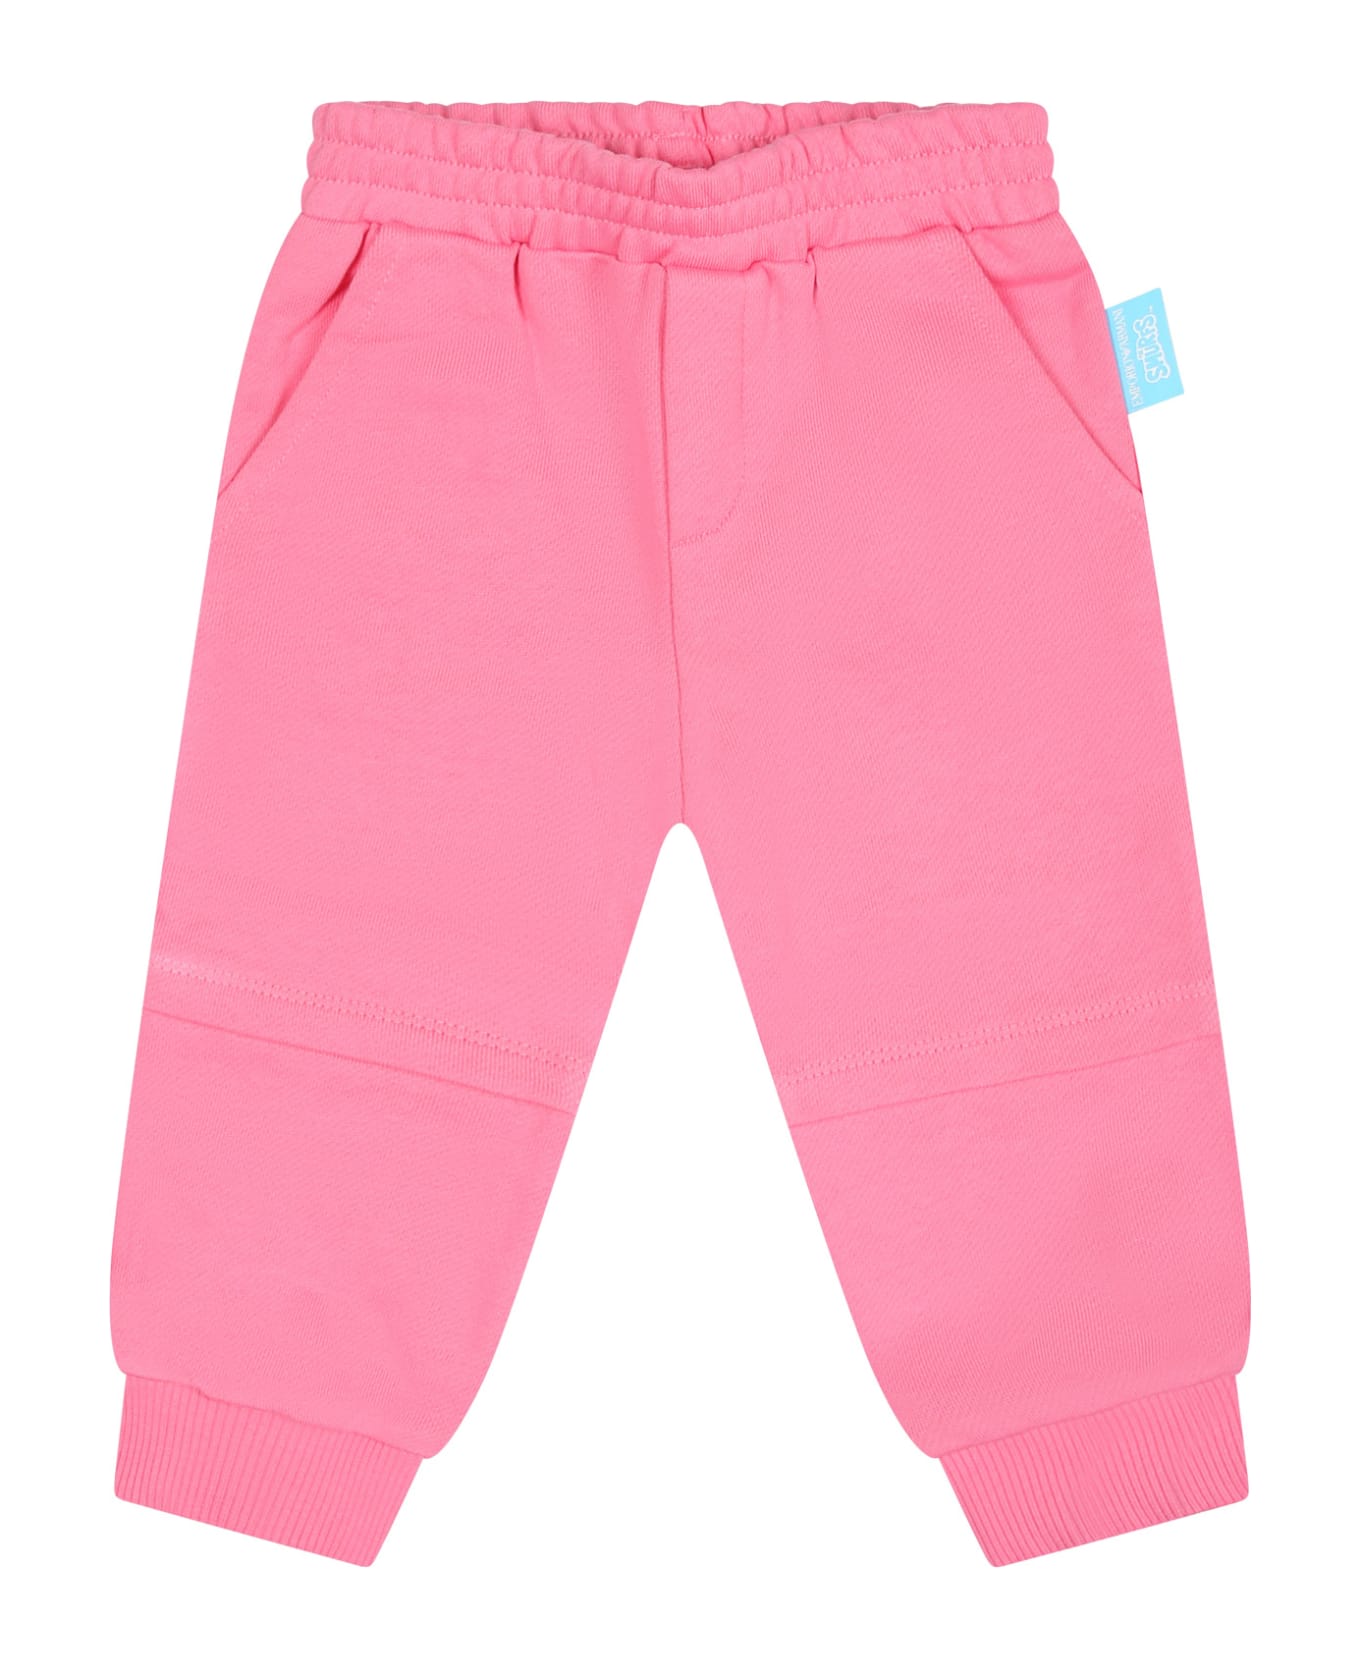 Emporio Armani Pink Sports Trousers For Baby Girl With The Smurfs - Pink